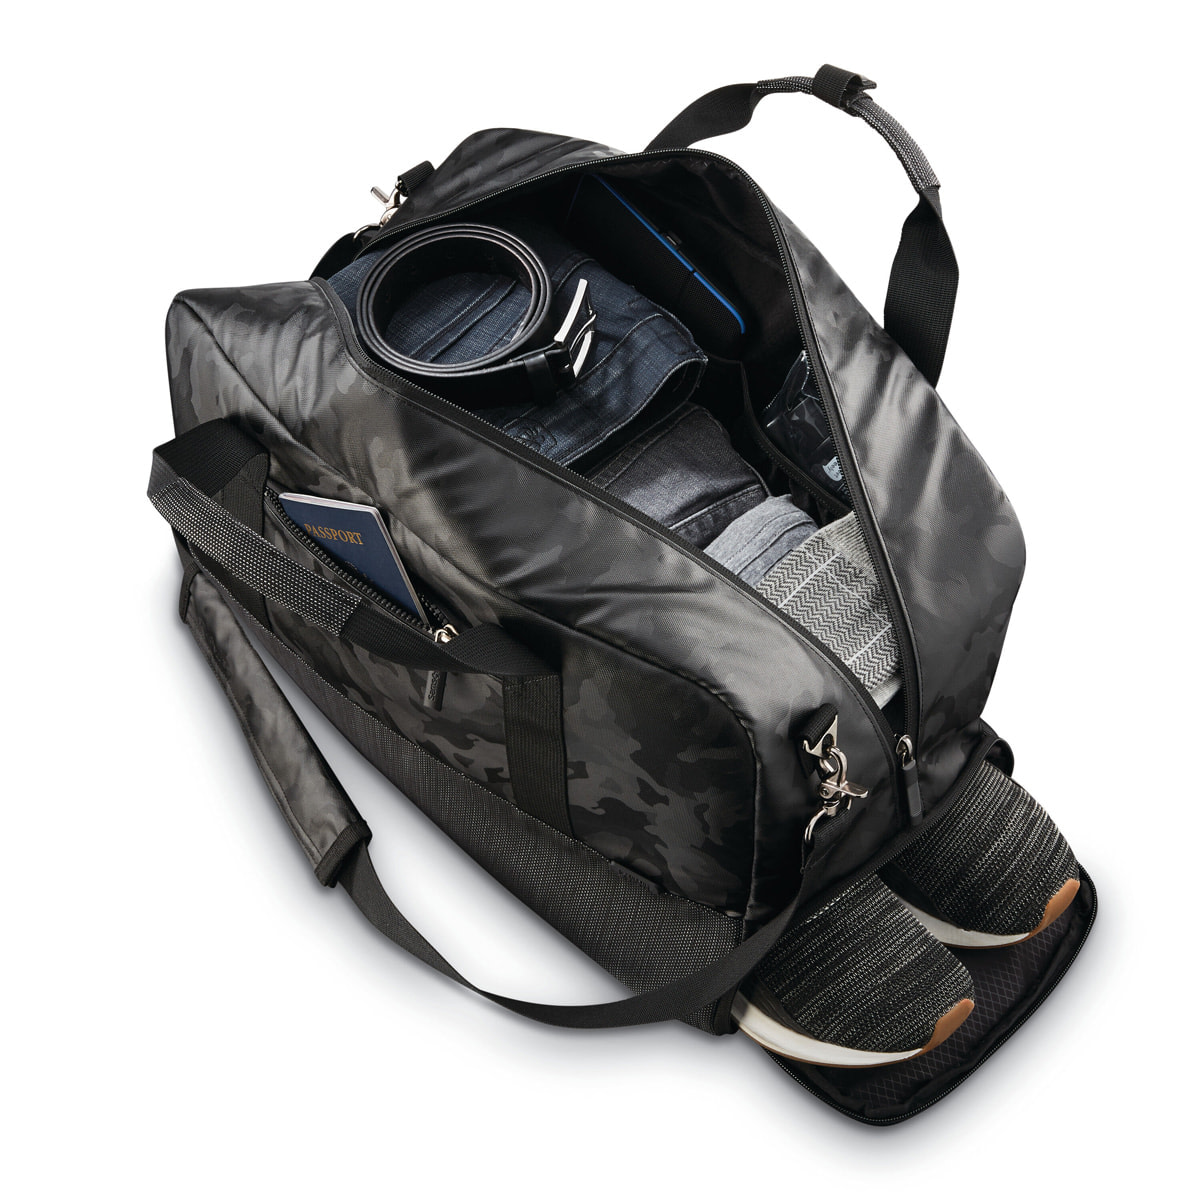 Men's sports bag with shoe compartment